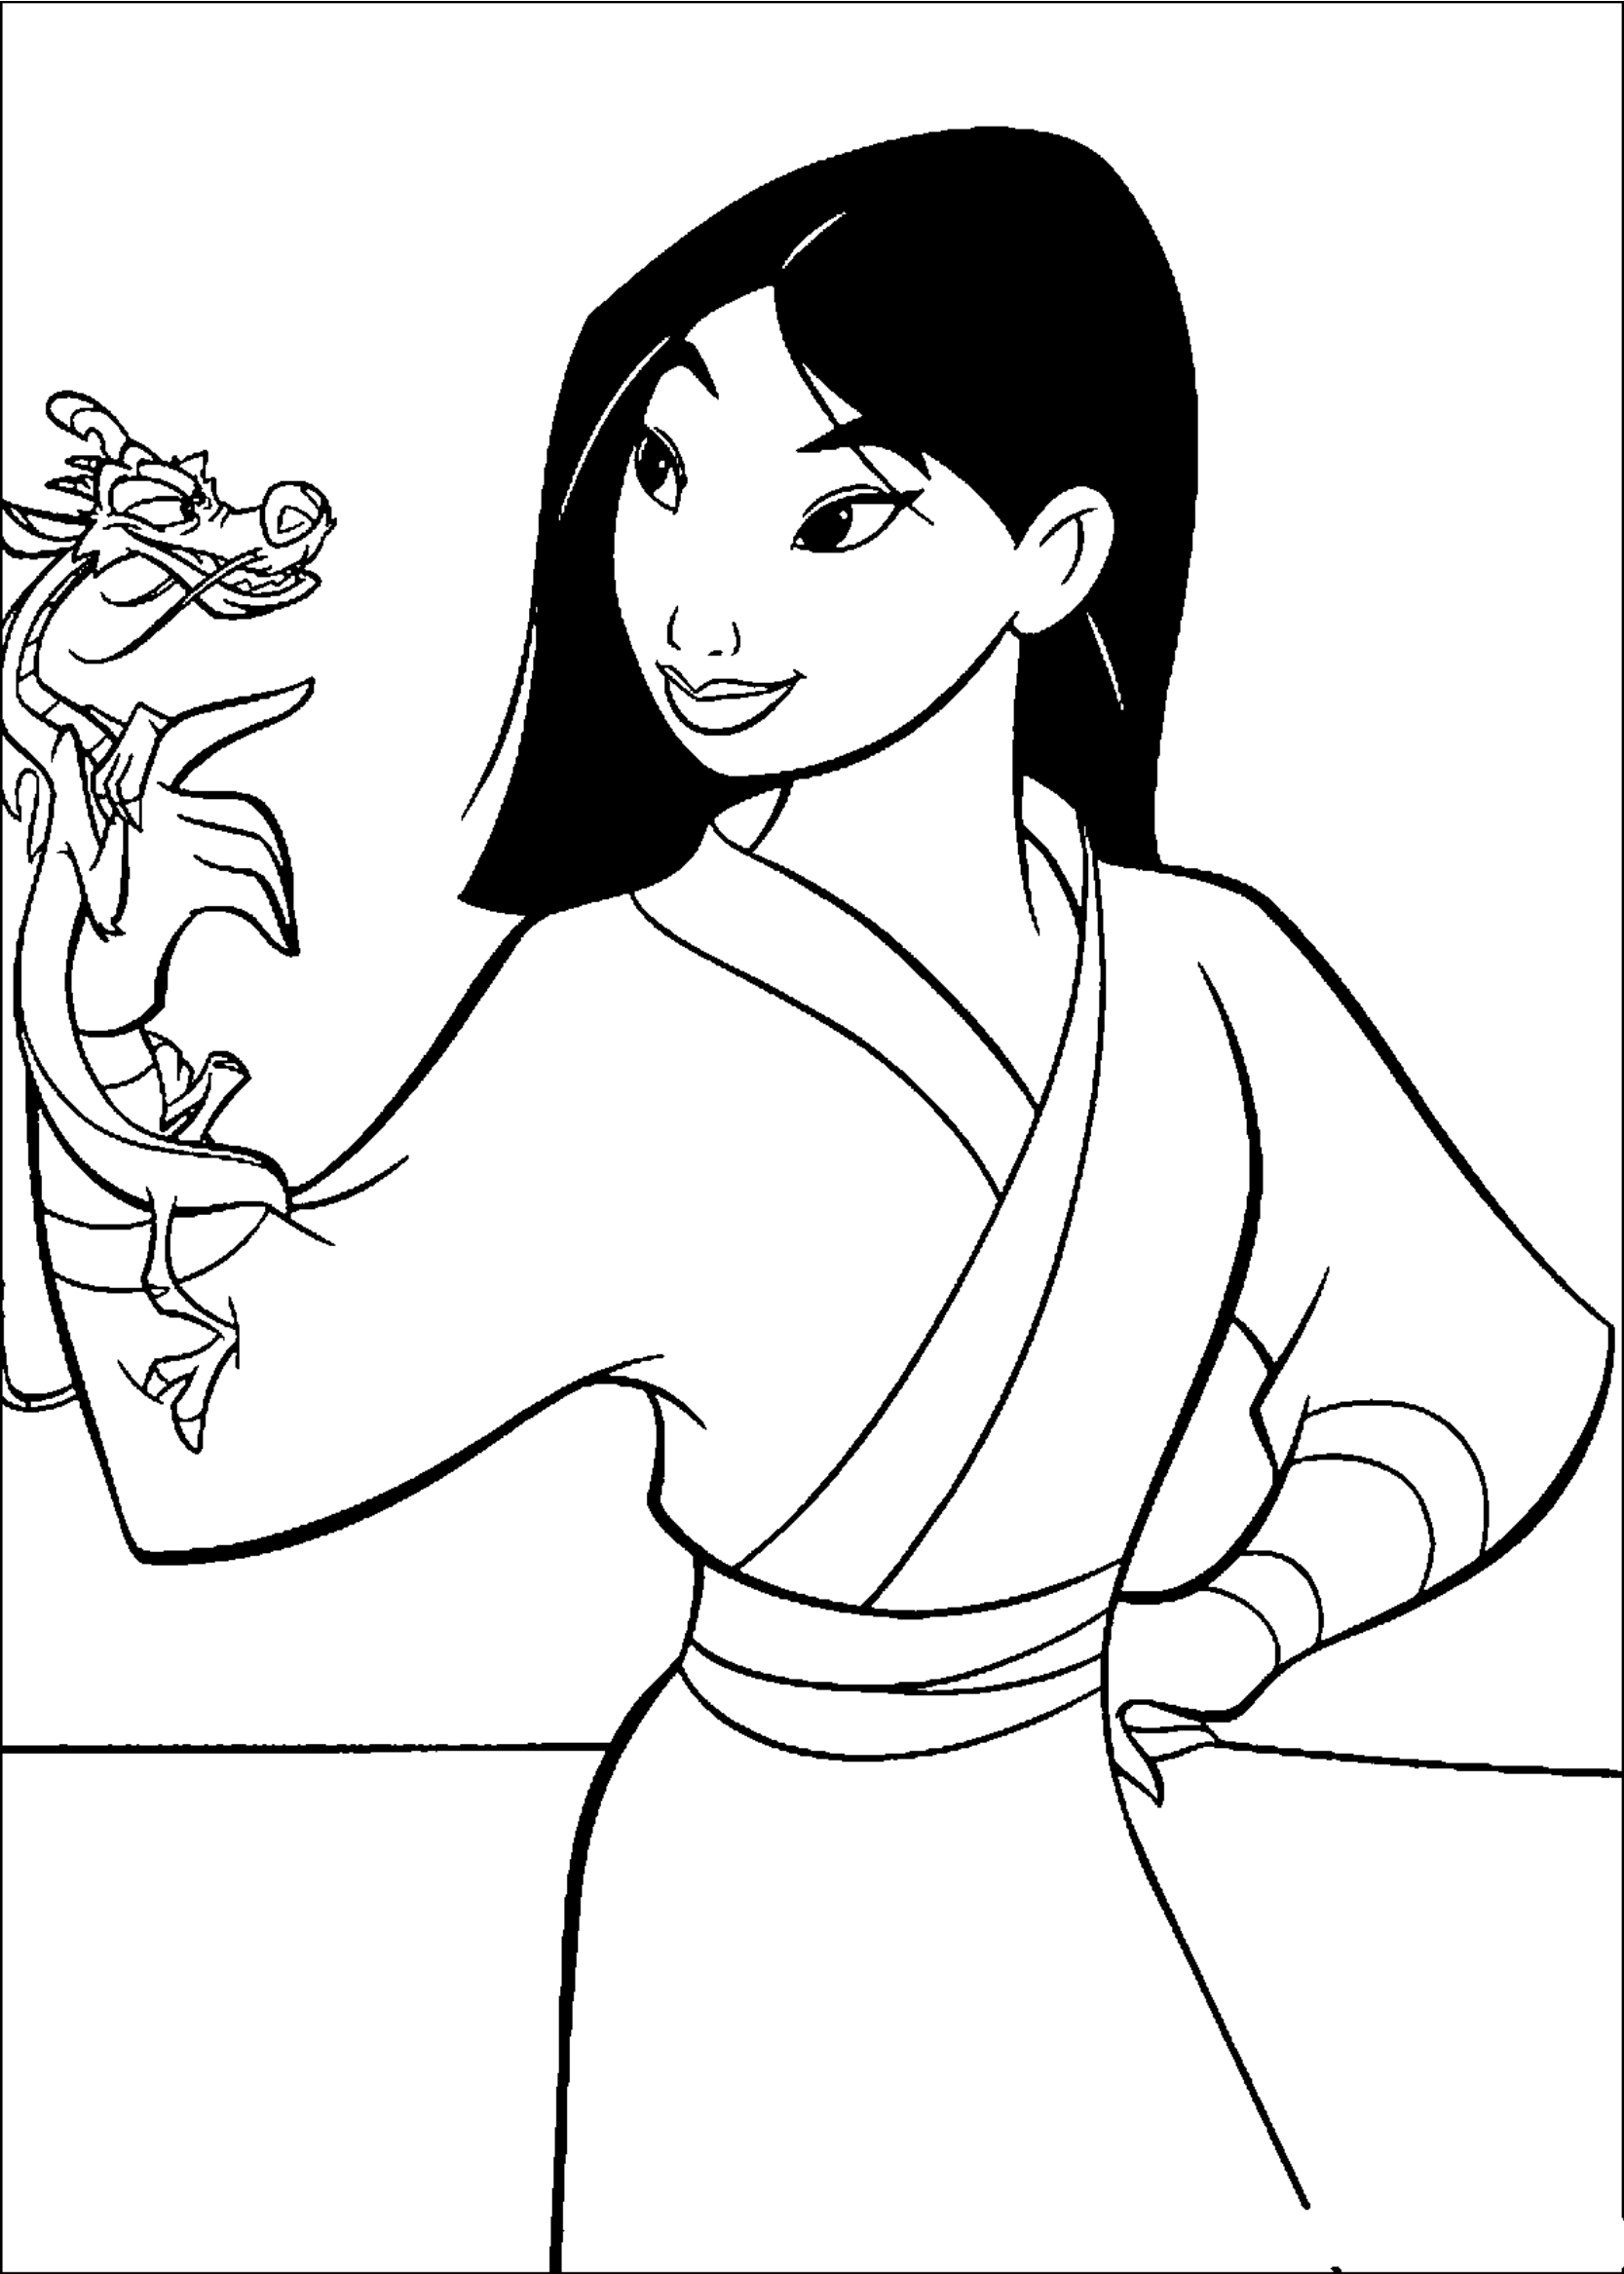 mulan-coloring-pages-to-download-and-print-for-free